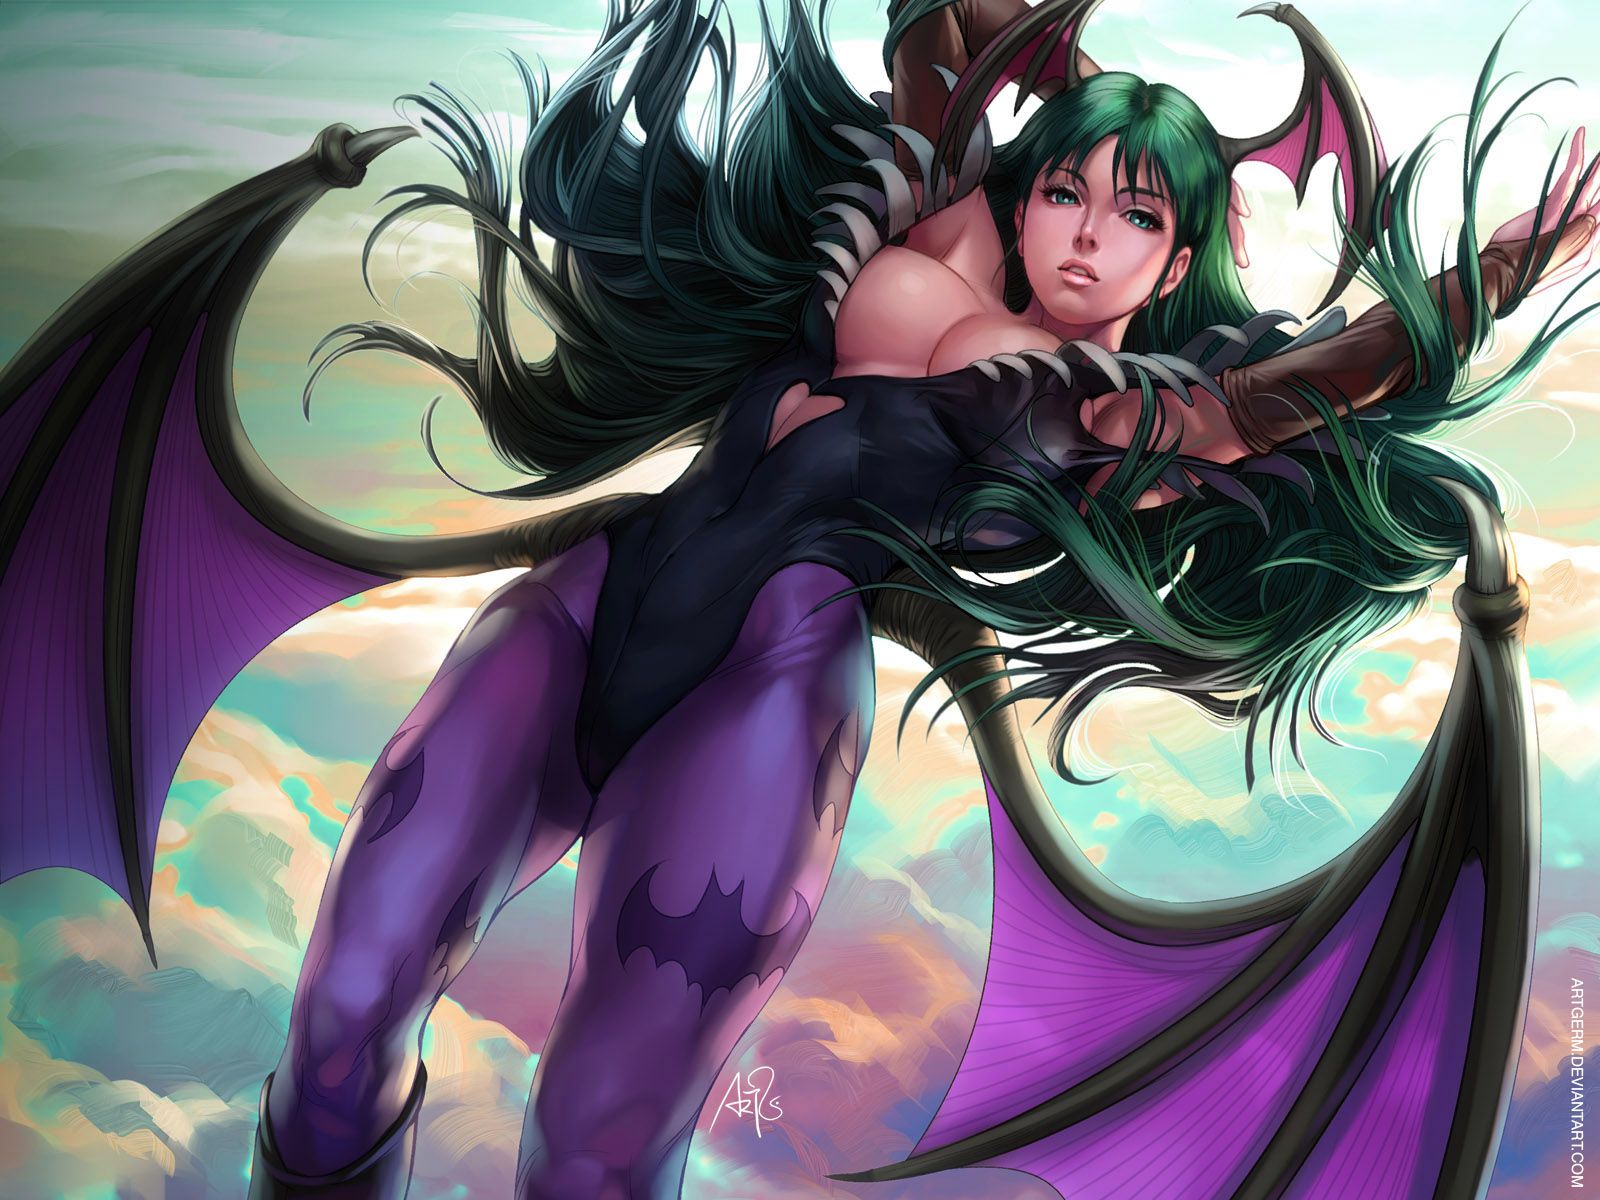 Like attacked by night! Sister of demon succubus hentai images vol.4 27